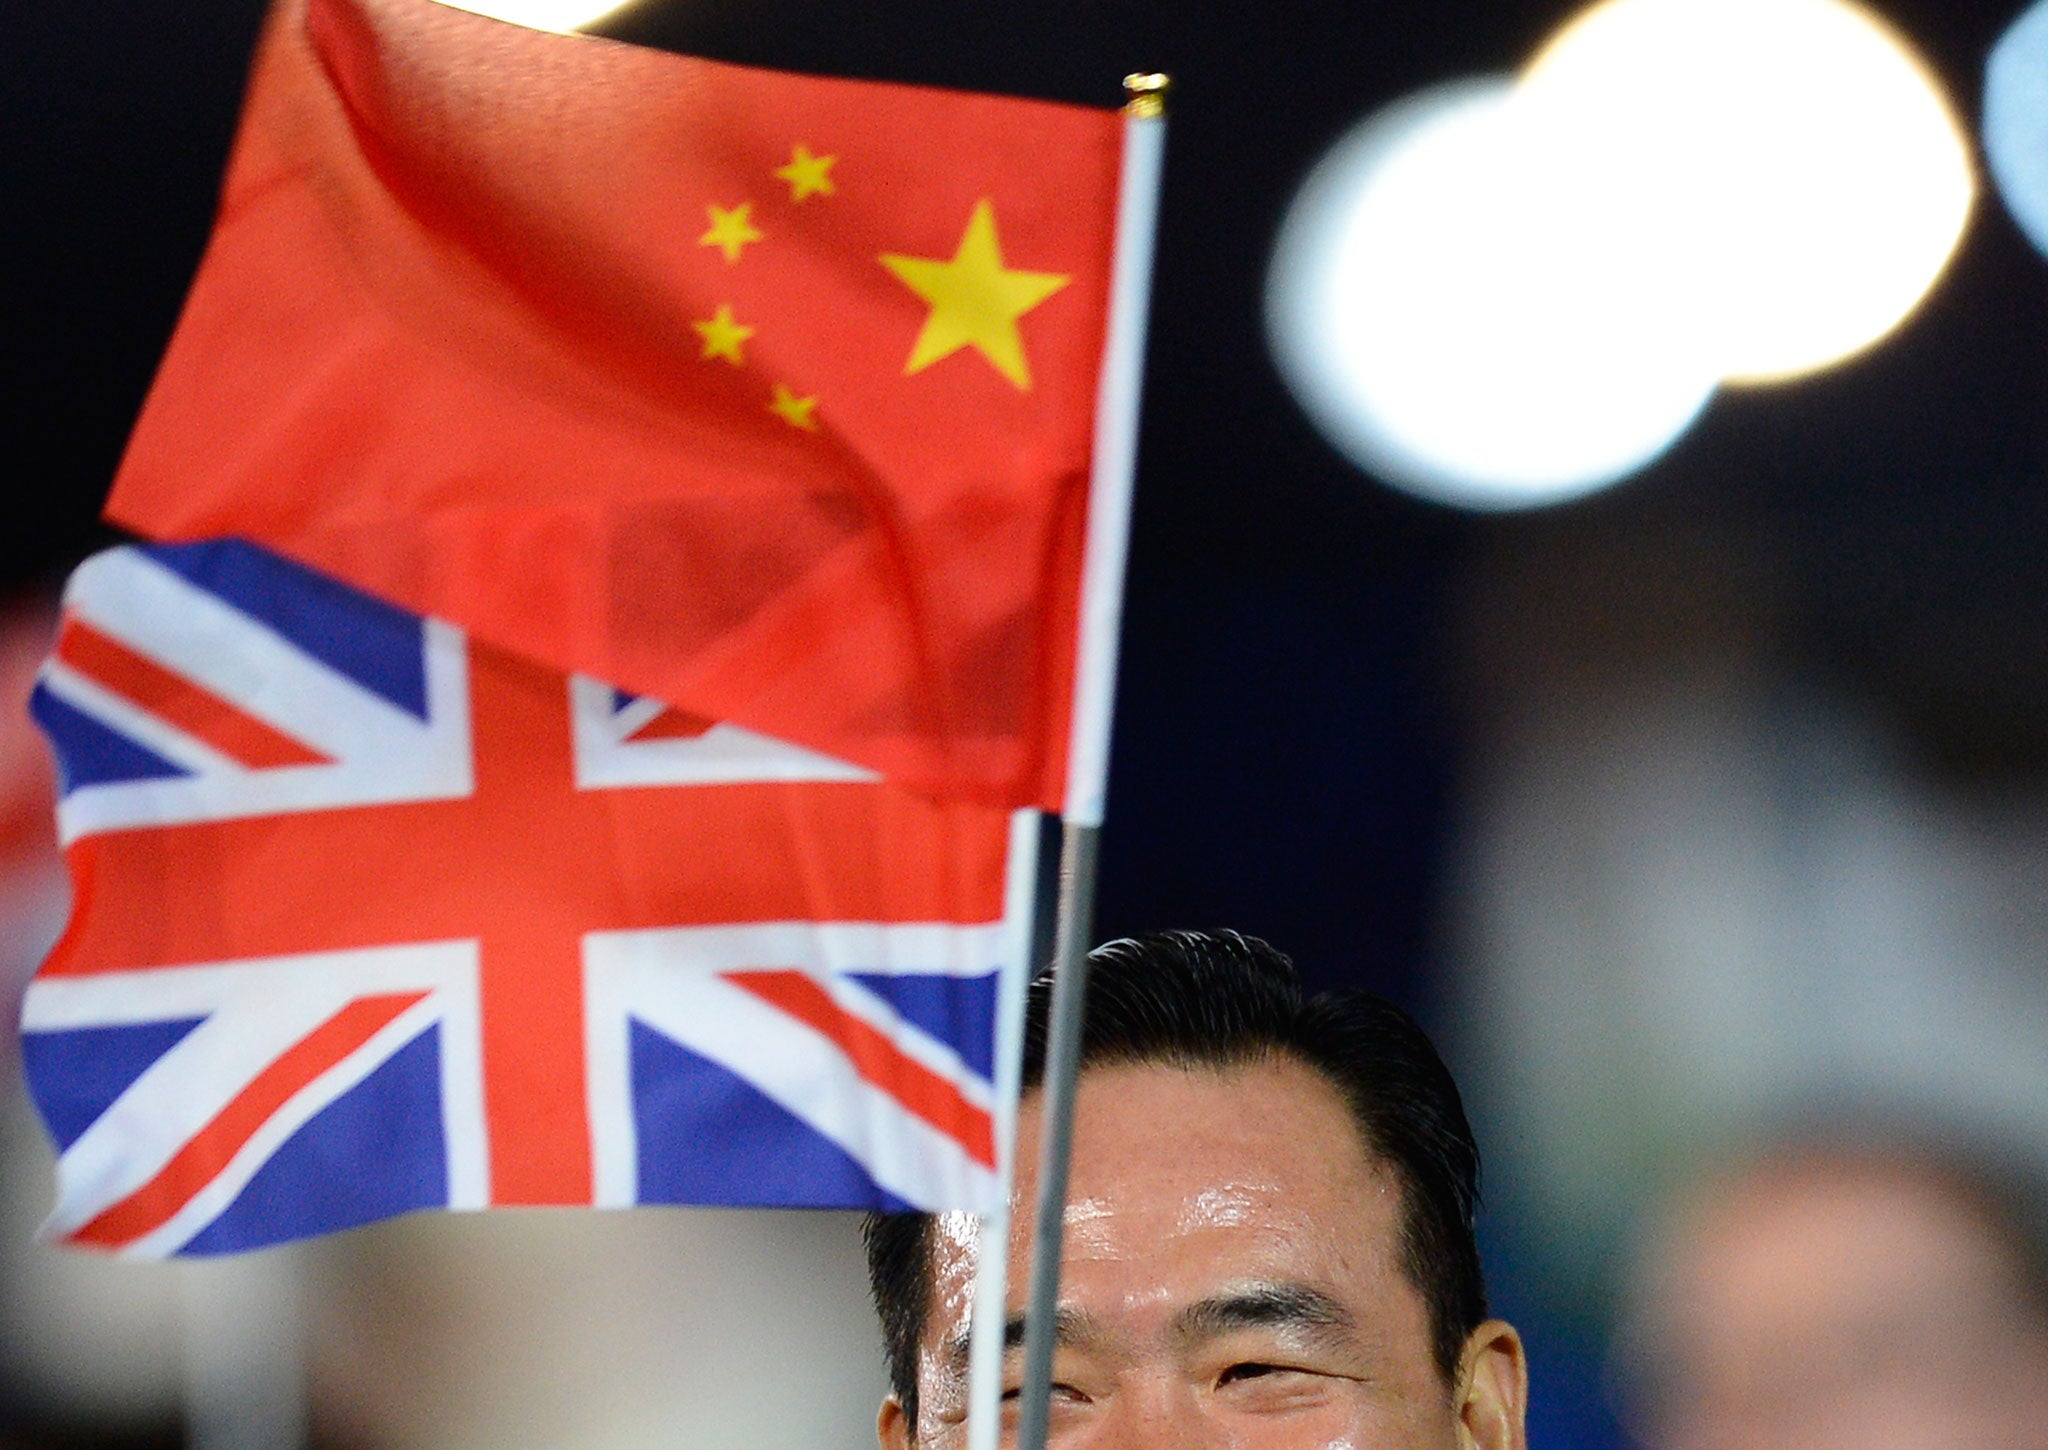 A member of the China's delegation holds a Chinese and a Union Jack flags as he parades during the opening ceremony of the London 2012 Olympic Games